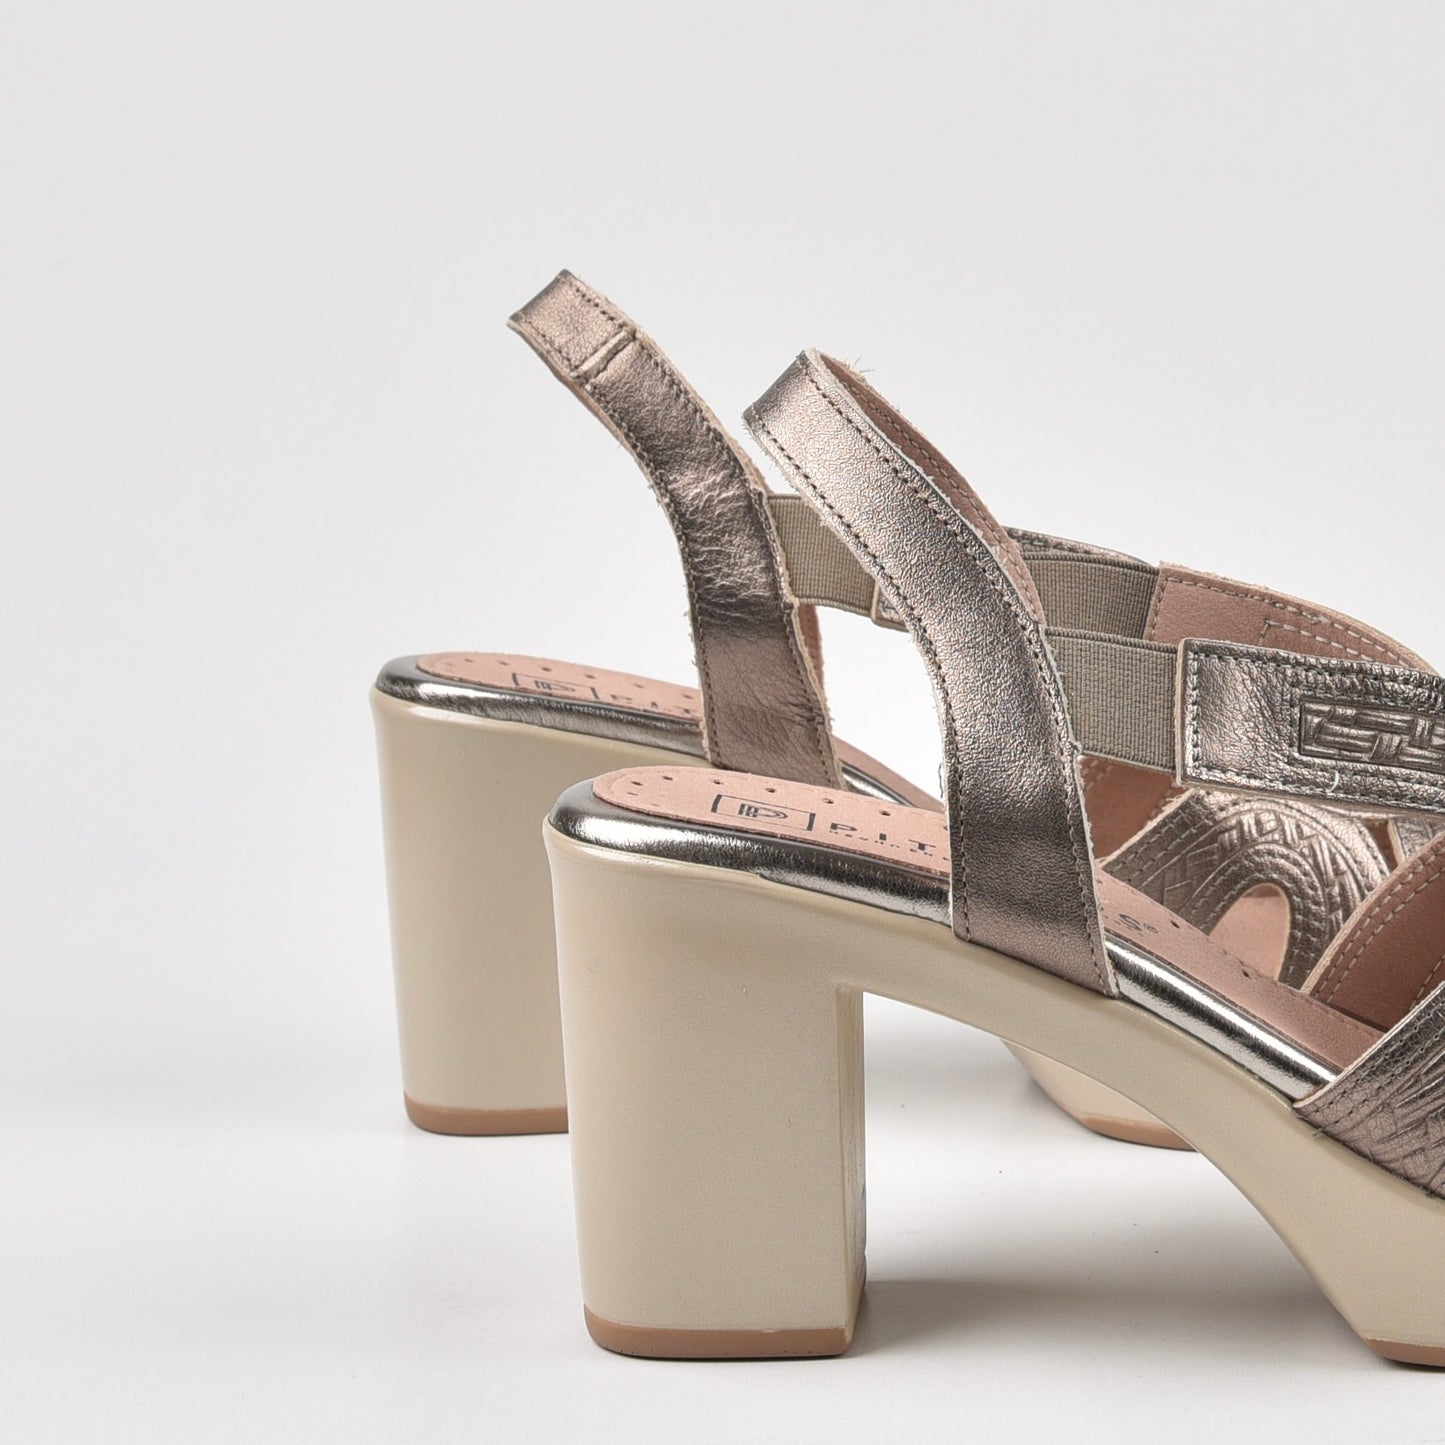 Pitillos Spanish Classic High Heel Sandal for Women in Bronce.